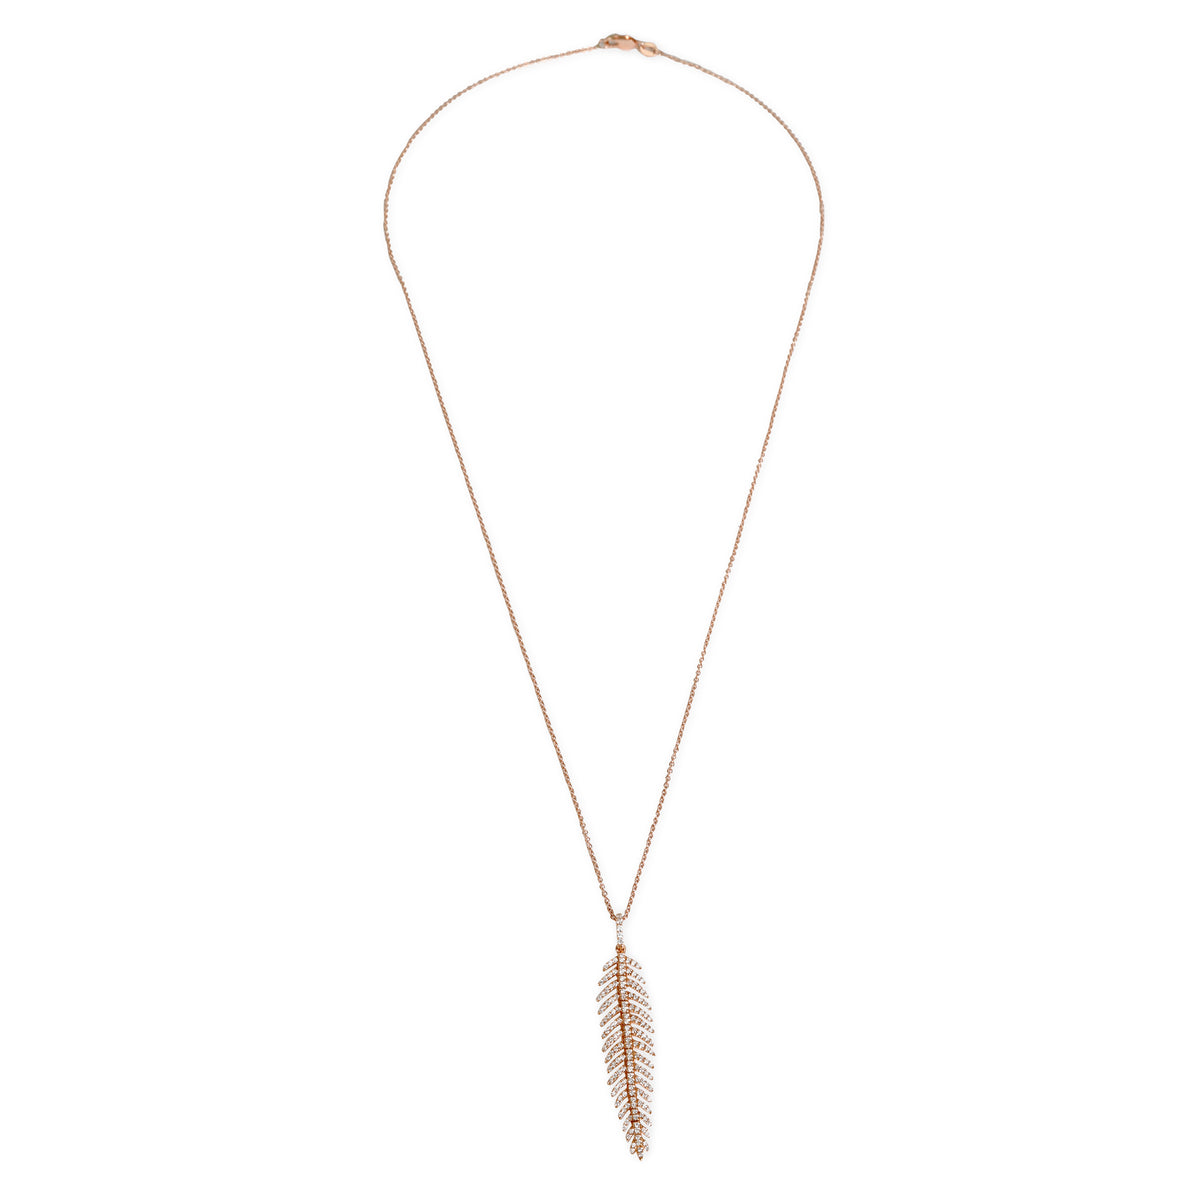 Nicole Rose Articulated Feather Diamond Necklace in 18K Rose Gold 0.44 CTW